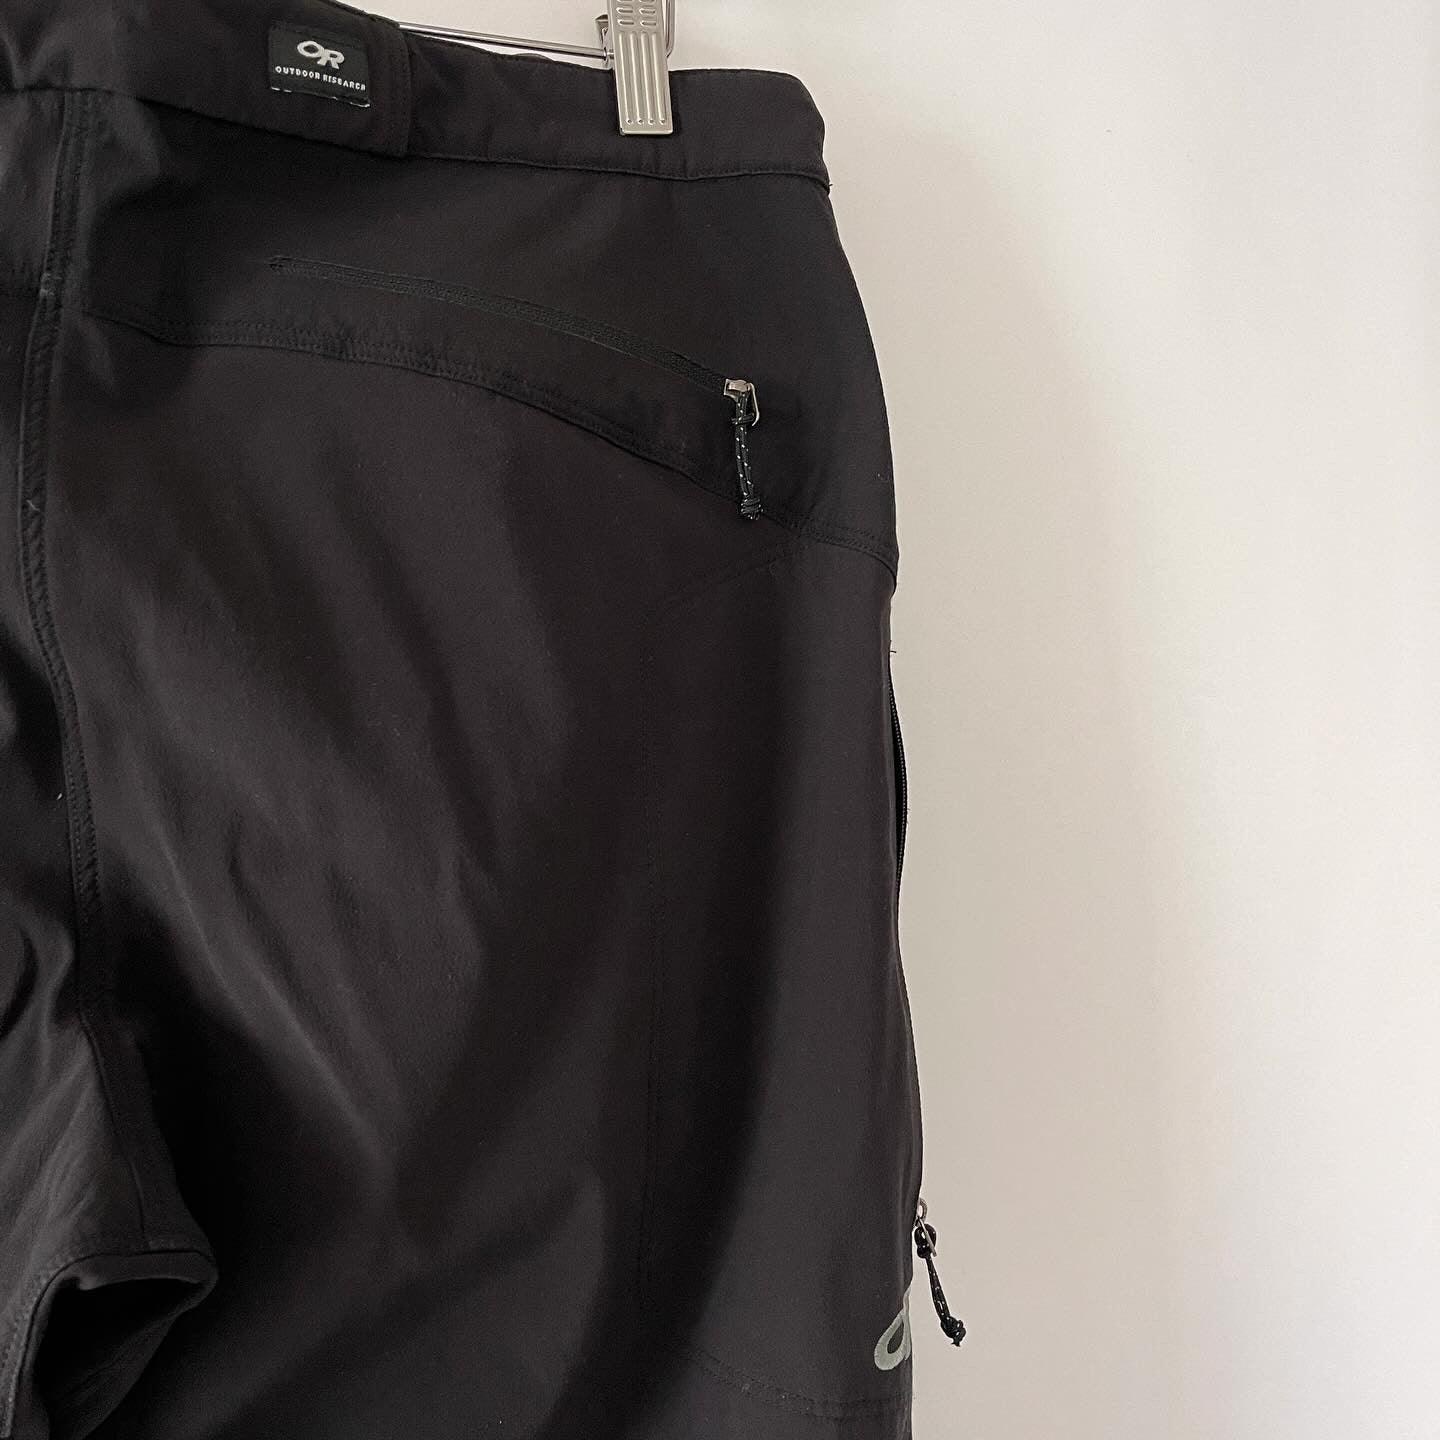 OUTDOOR RESEARCH - OUTDOOR RESEARCH Pants - AVVIIVVA.COM